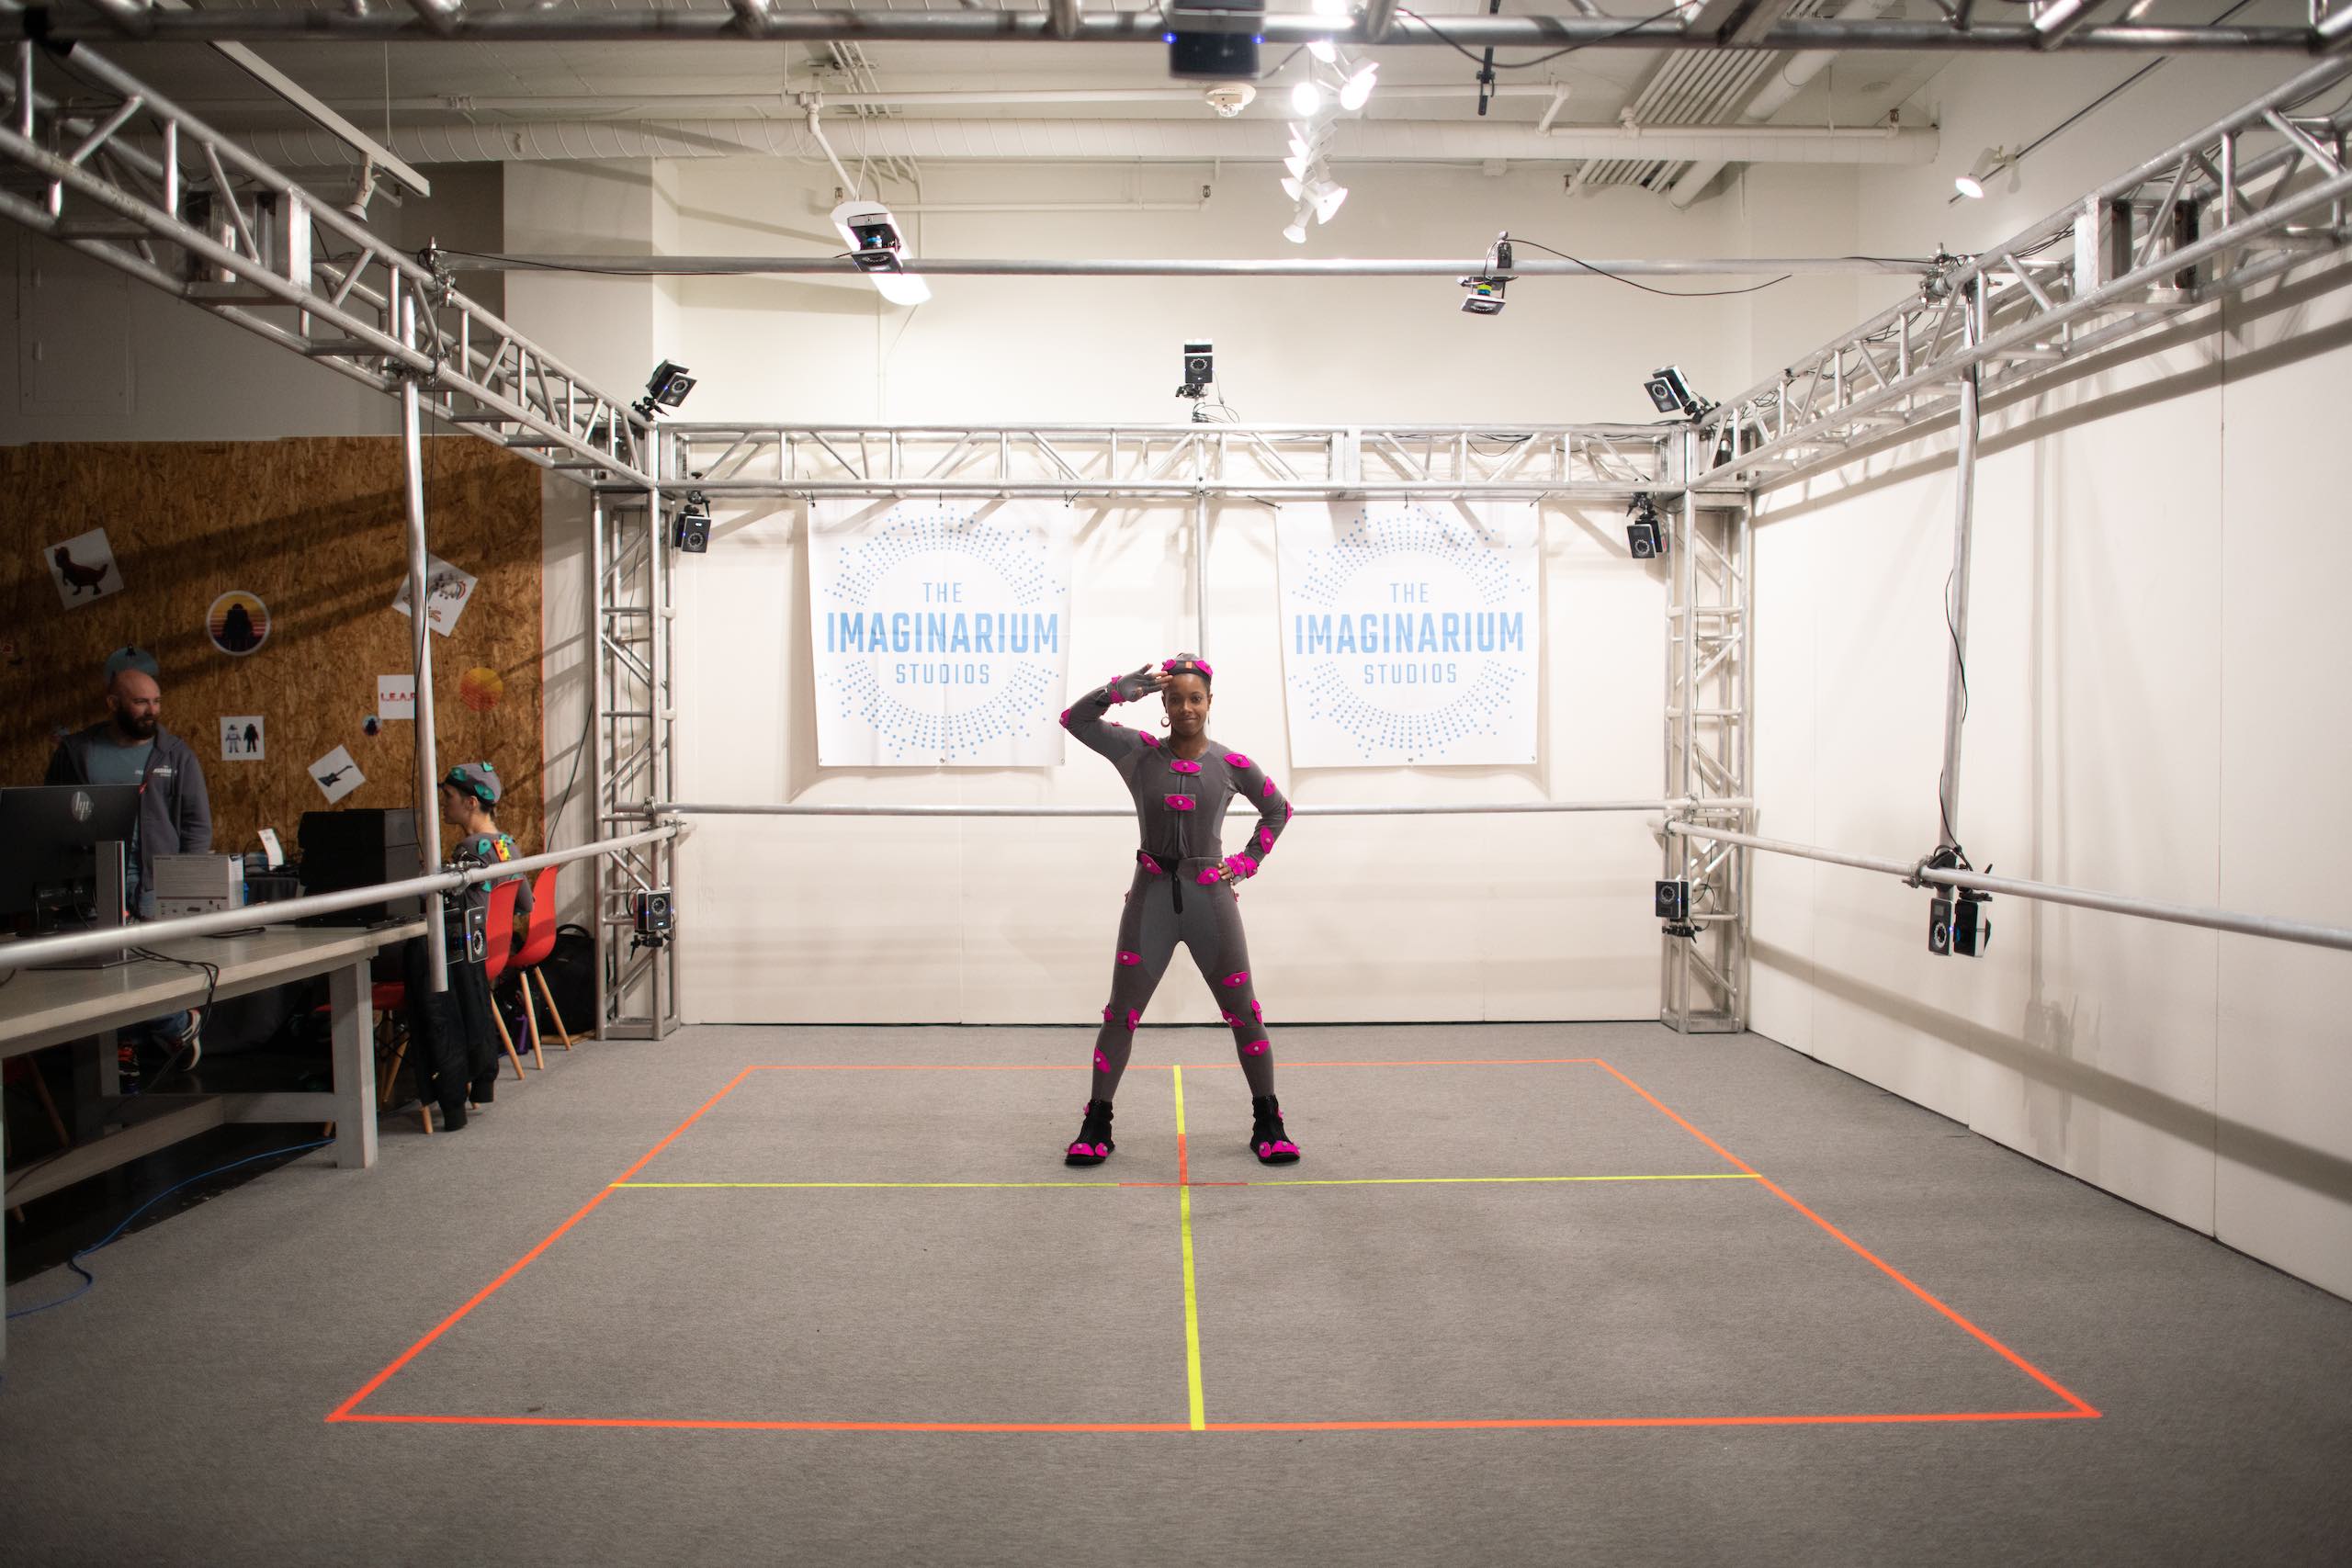 Woman with pink body movement sensors smiling and posing doing a salute in front of The Imaginarium Studios signs